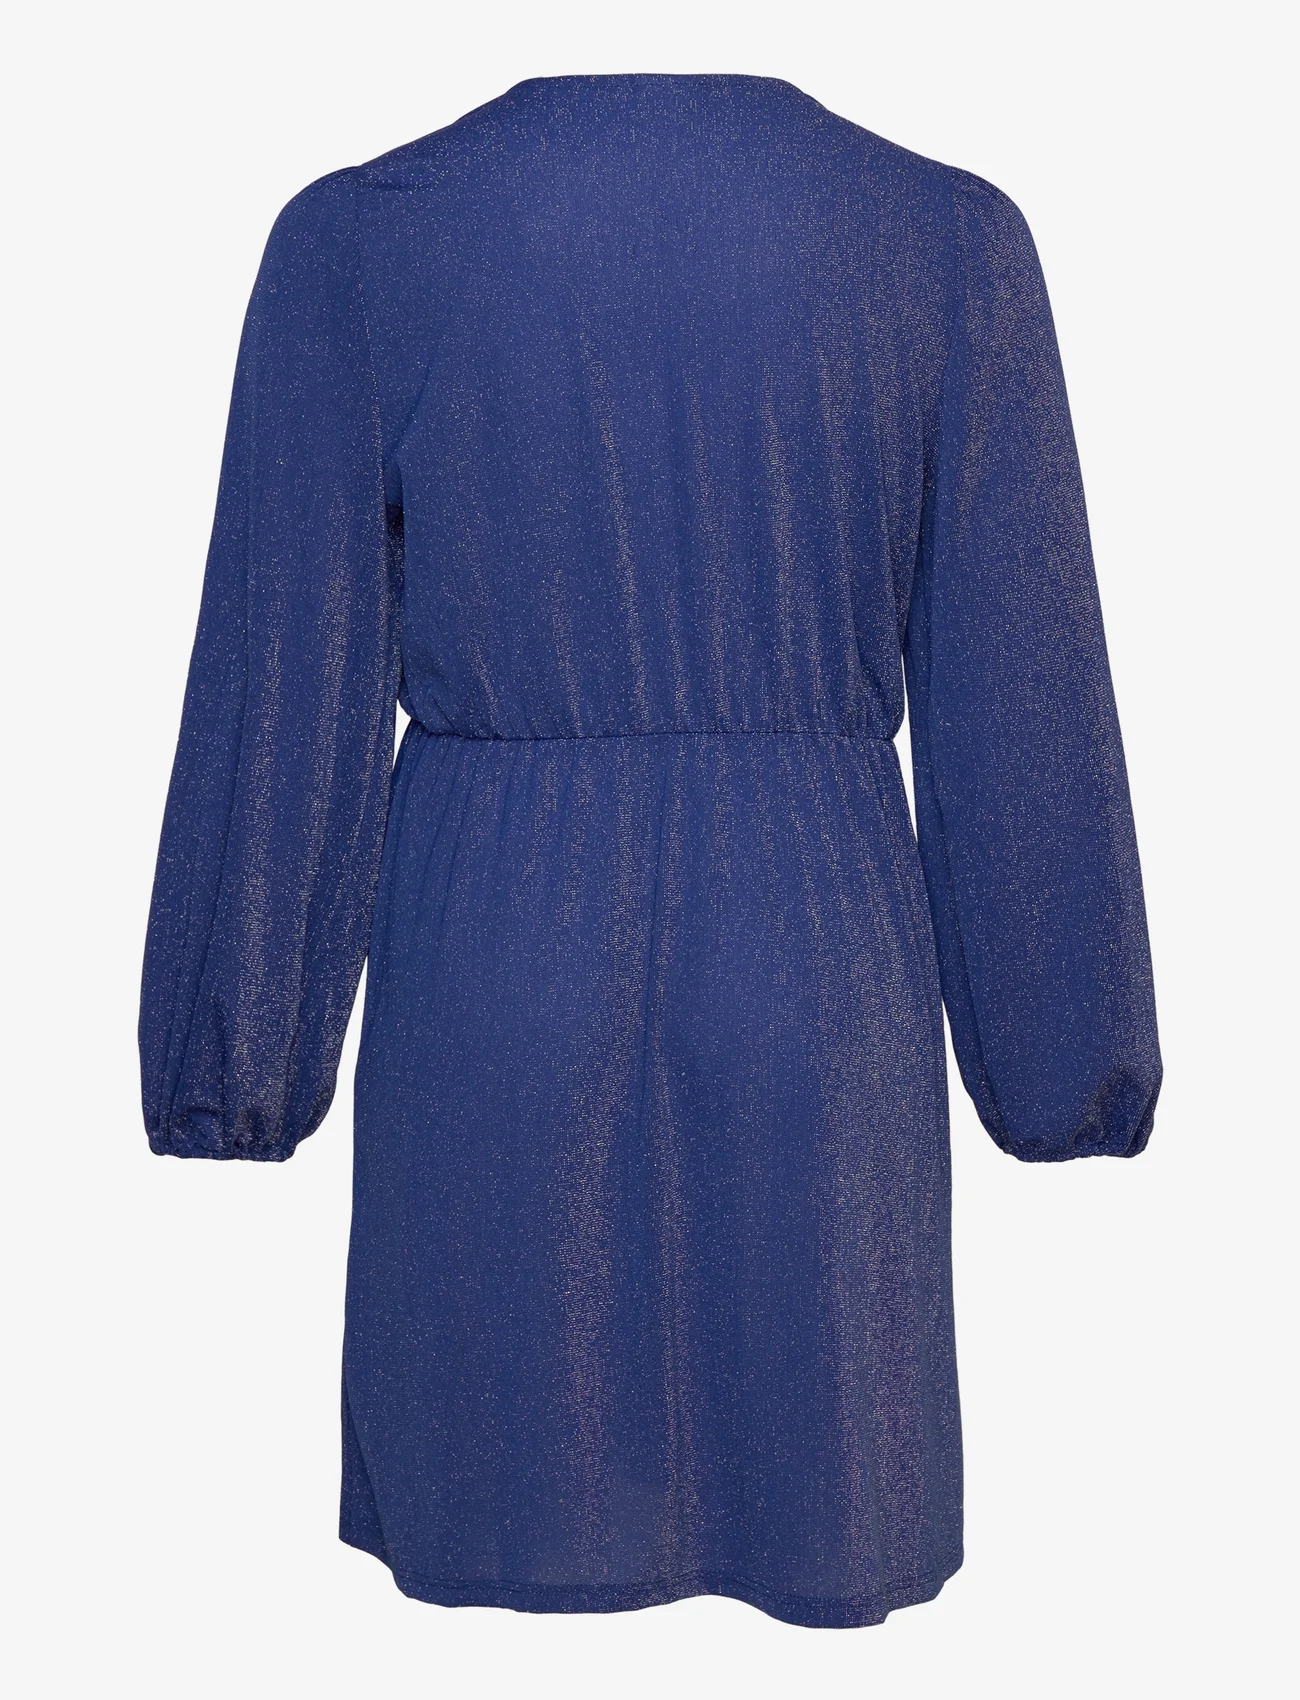 ONLY Carmakoma - CARFIESTA L/S V-NECK GLITTER DRESS JRS - party wear at outlet prices - bluing - 1